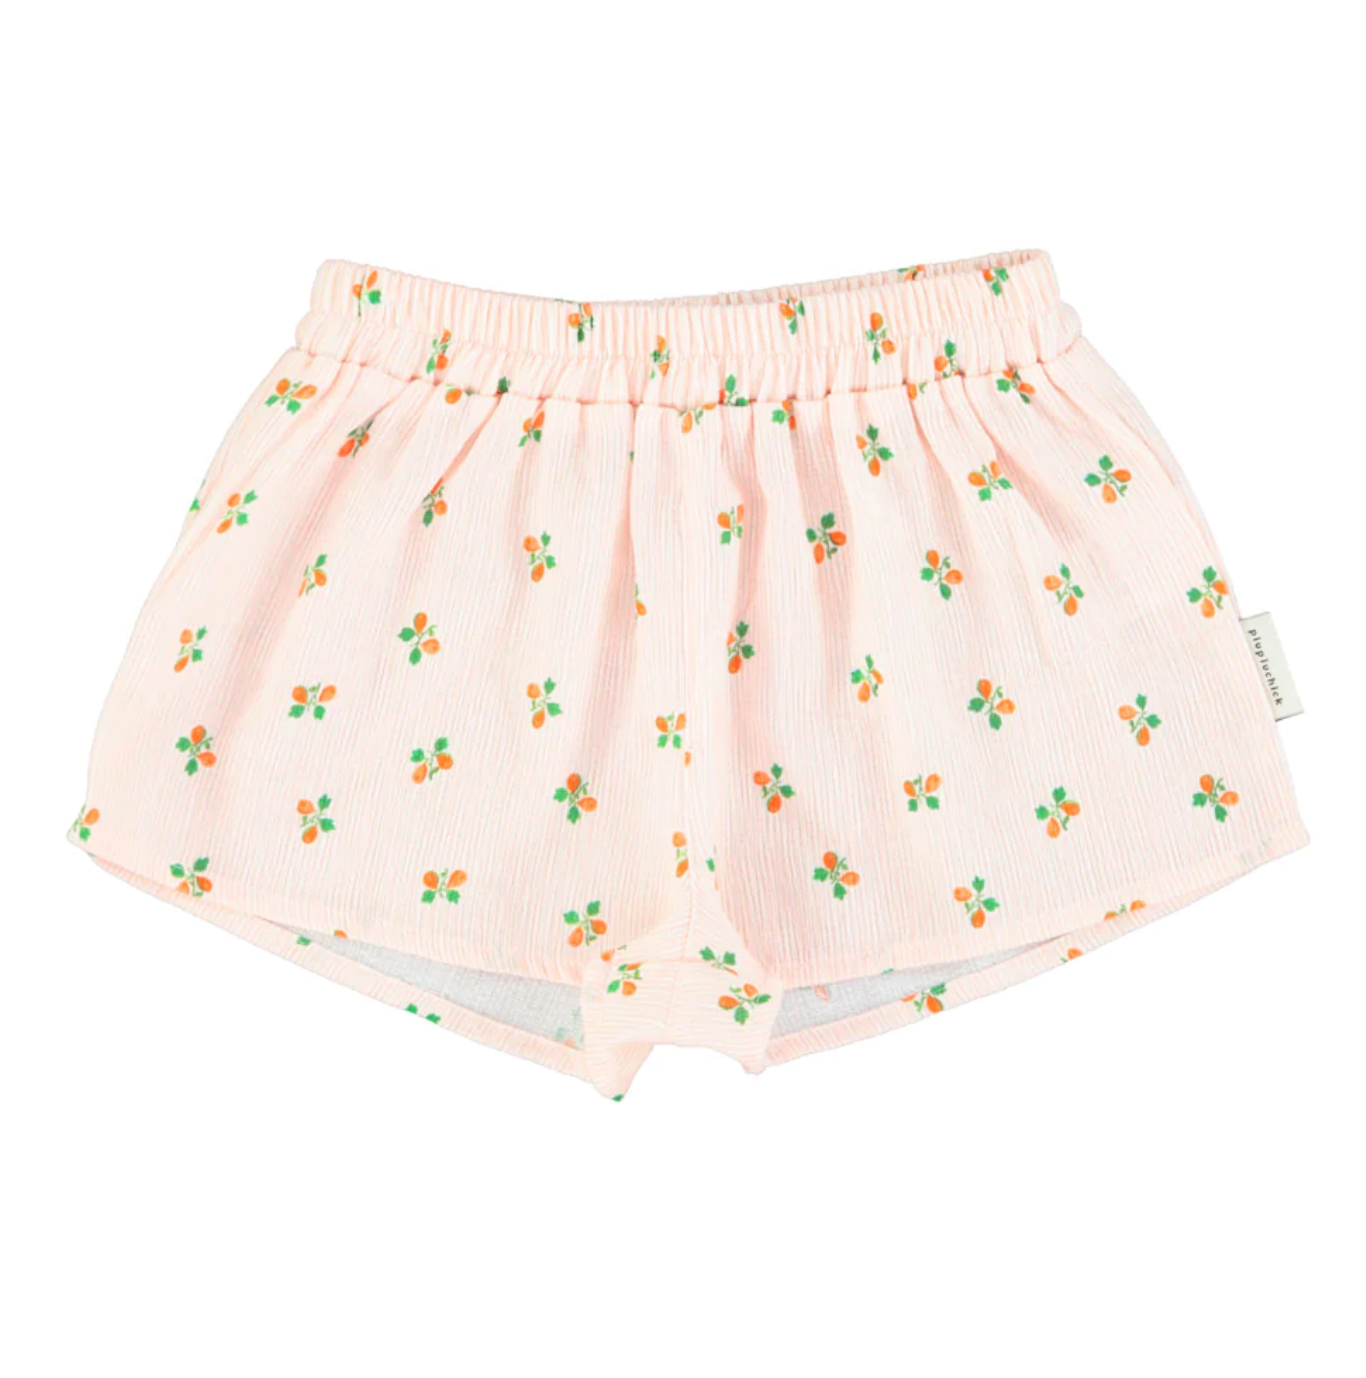 Shorts - Pale pink striped and small flowers